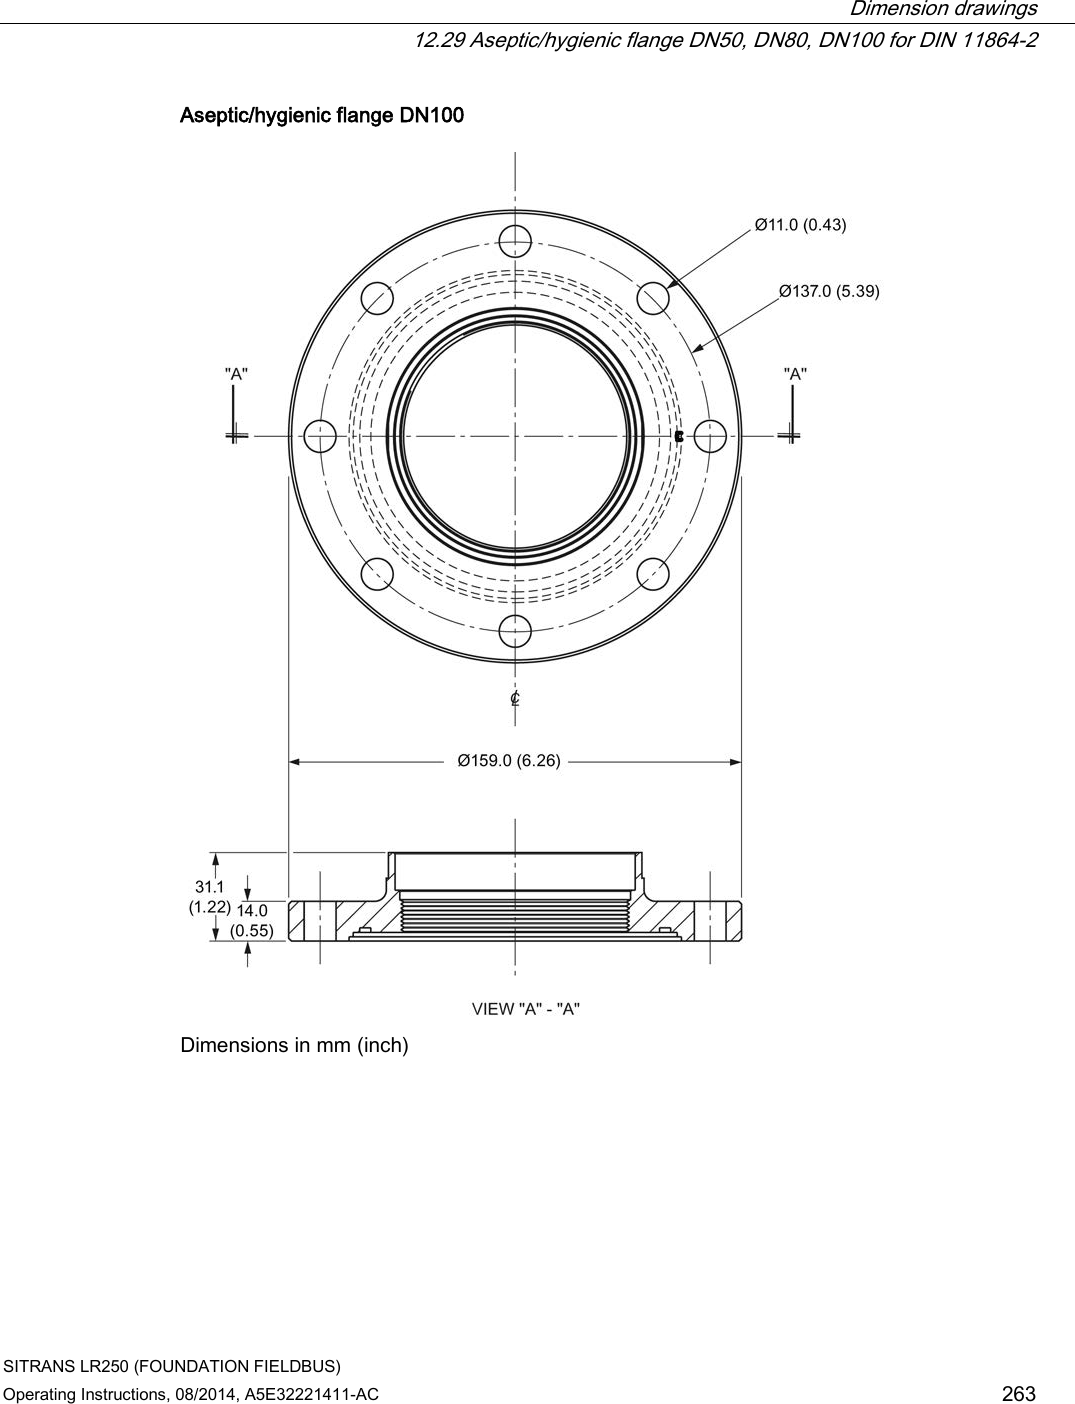  Dimension drawings  12.29 Aseptic/hygienic flange DN50, DN80, DN100 for DIN 11864-2 SITRANS LR250 (FOUNDATION FIELDBUS) Operating Instructions, 08/2014, A5E32221411-AC 263 Aseptic/hygienic flange DN100  Dimensions in mm (inch) 